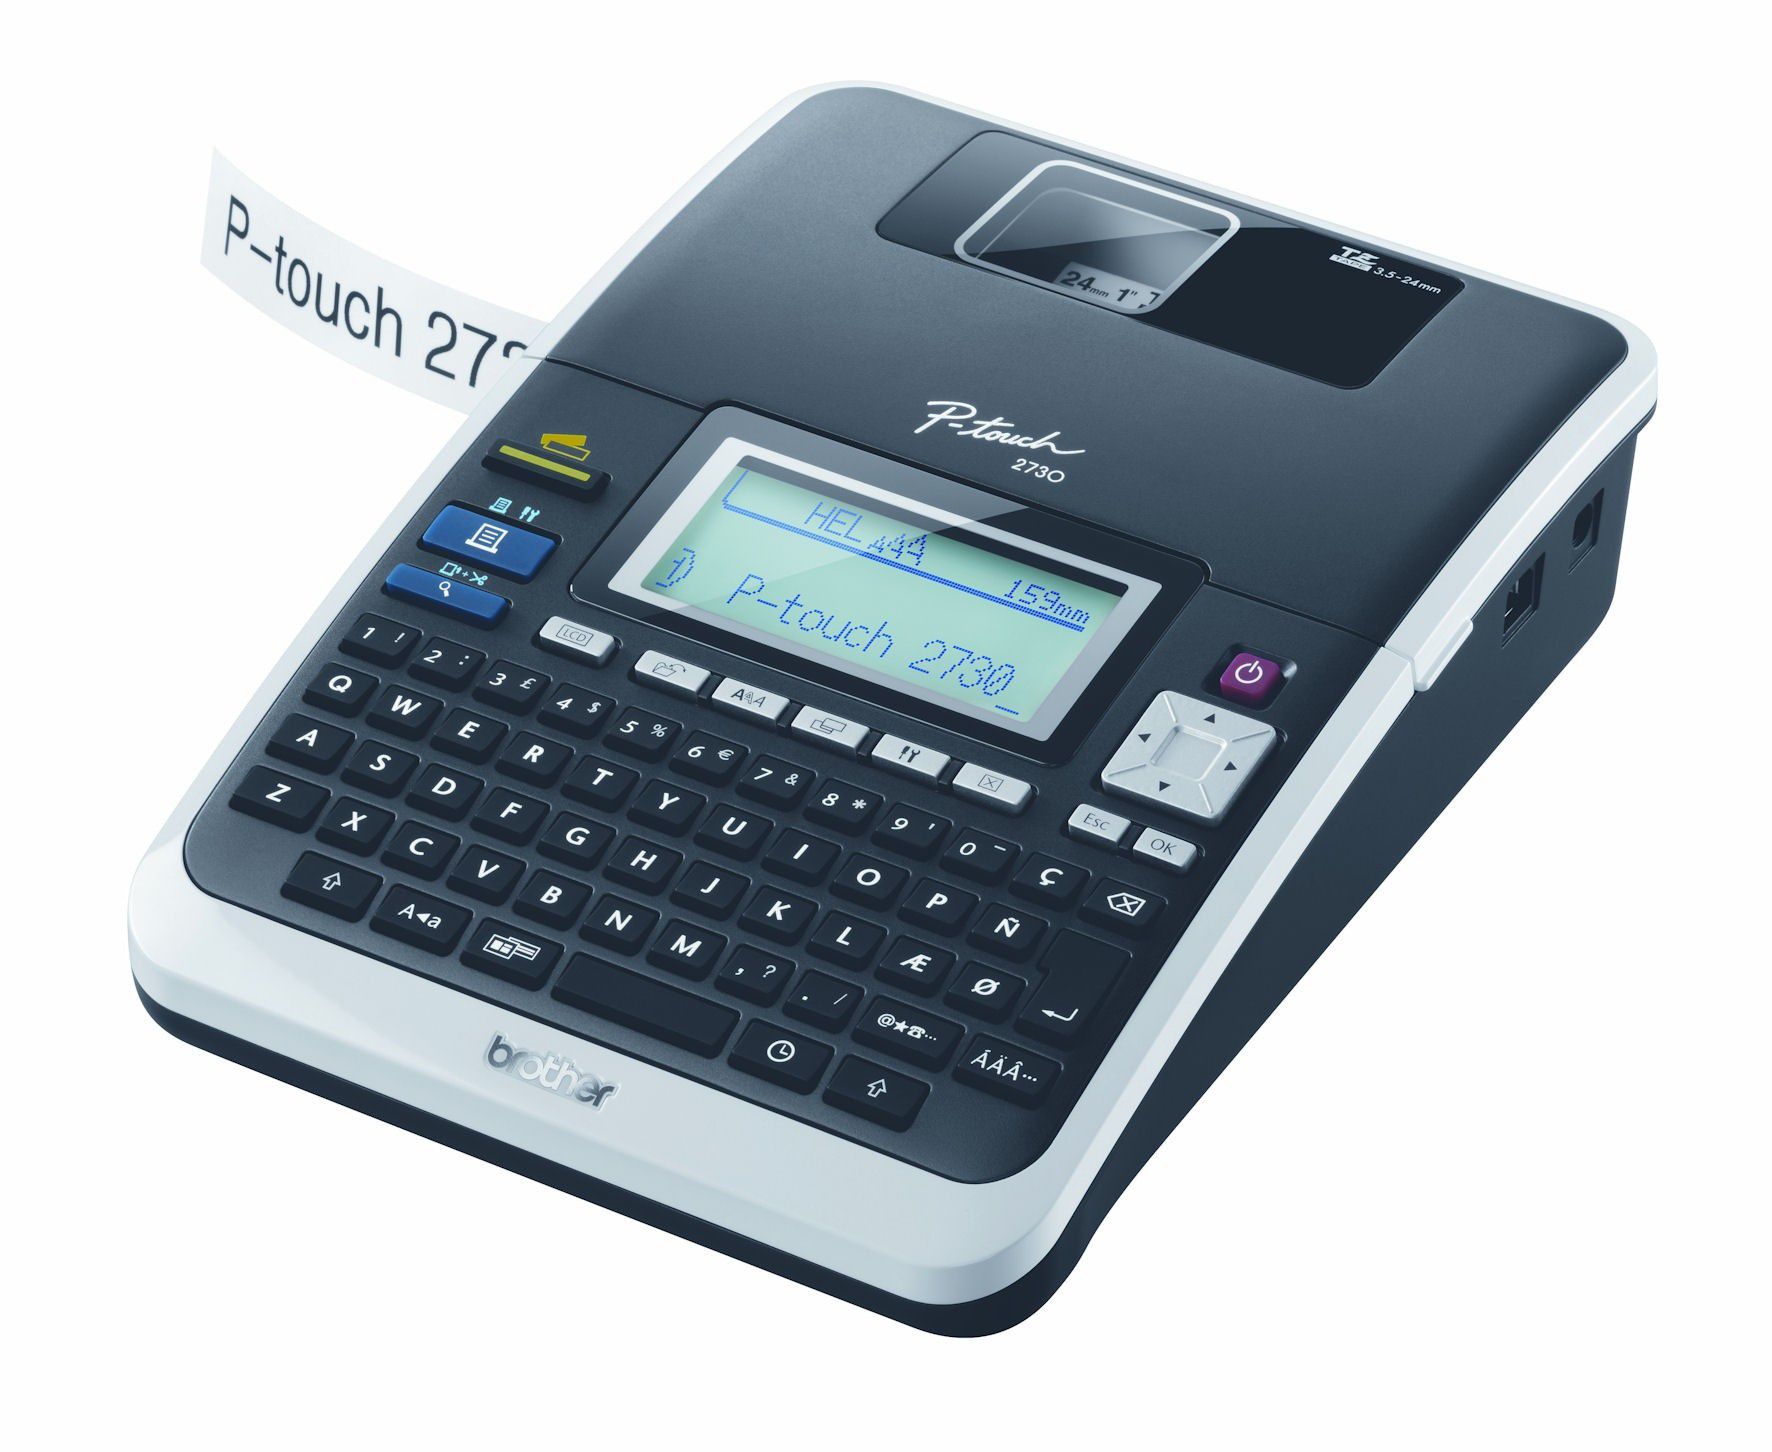 p-touch 2730 software download